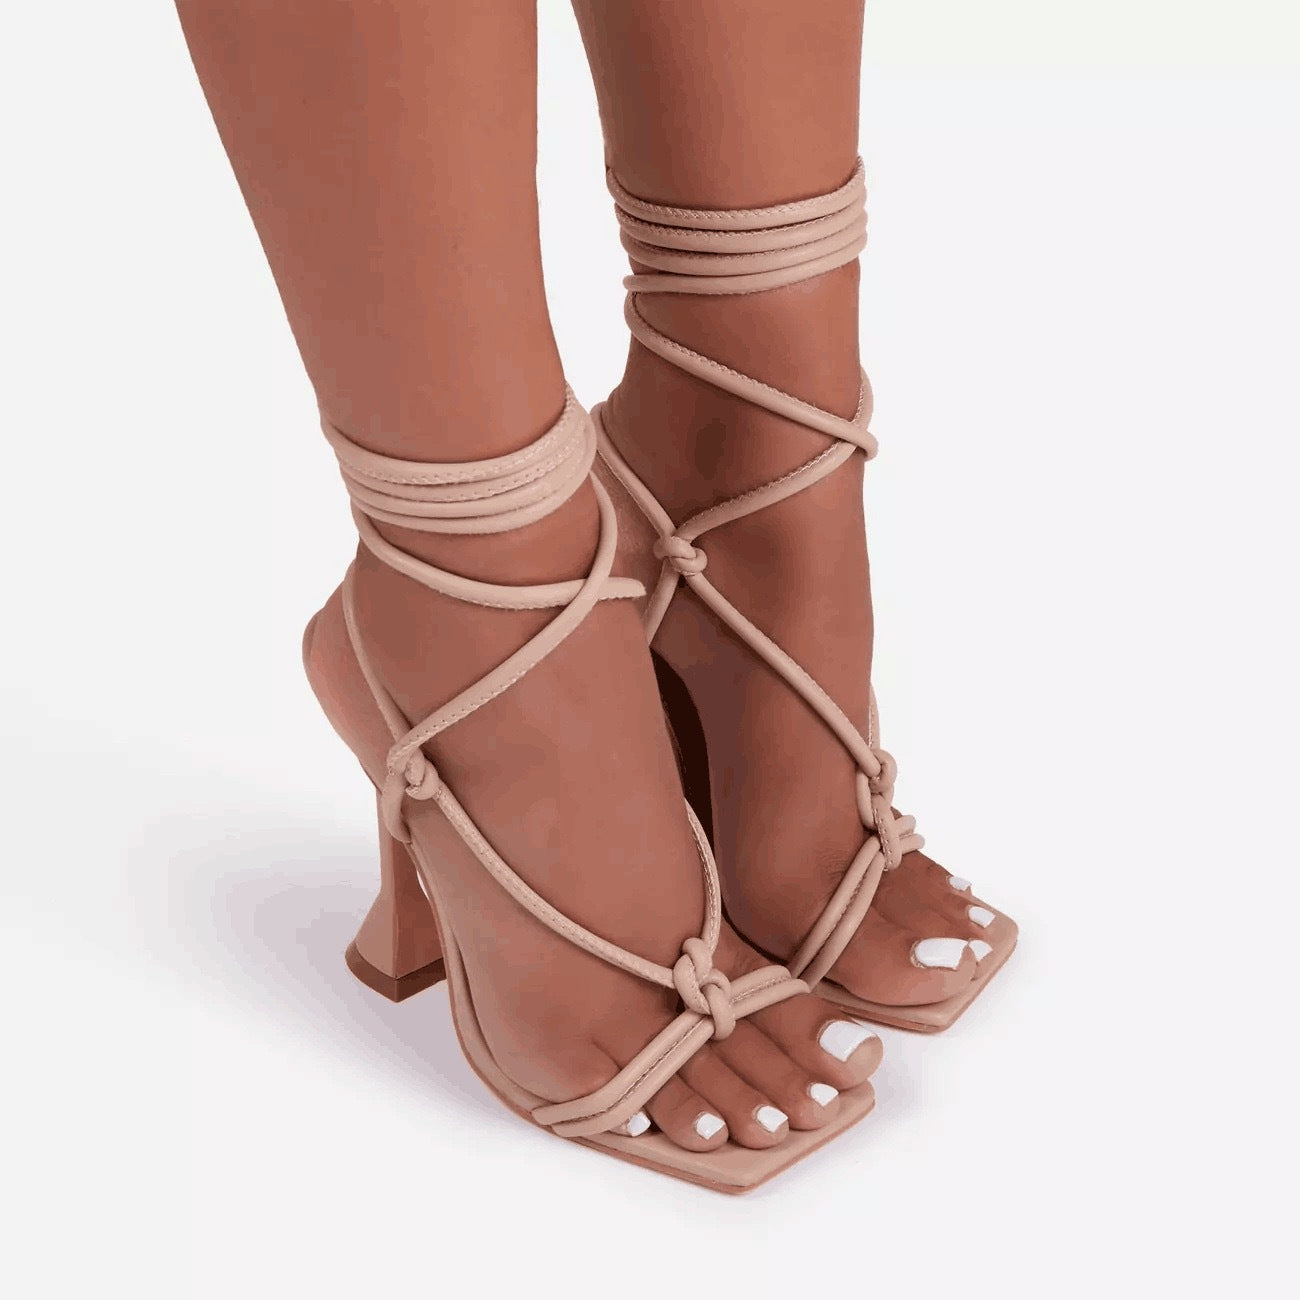 High Heel Strappy Sandals Women Square Toe Shoes Party